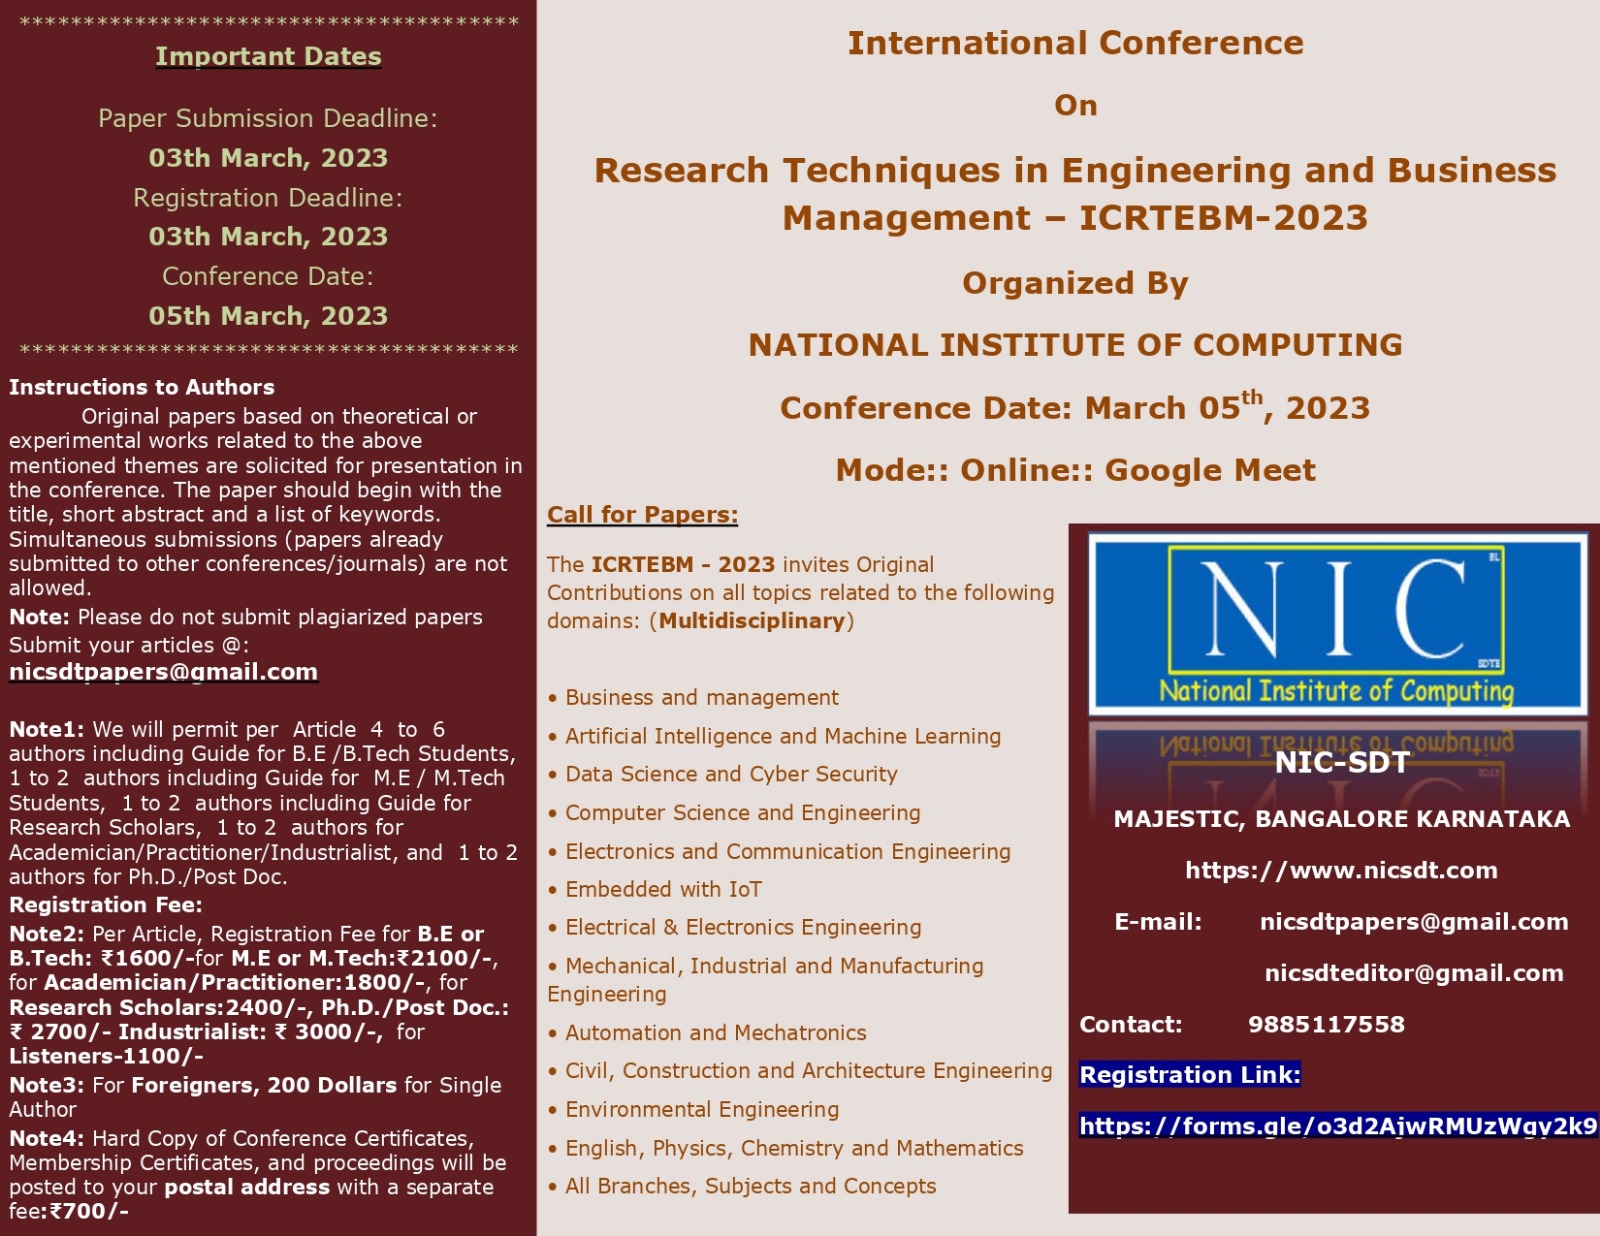 Virtual International Conference On Research Techniques in Engineering and Business Management ICRTEBM 2023